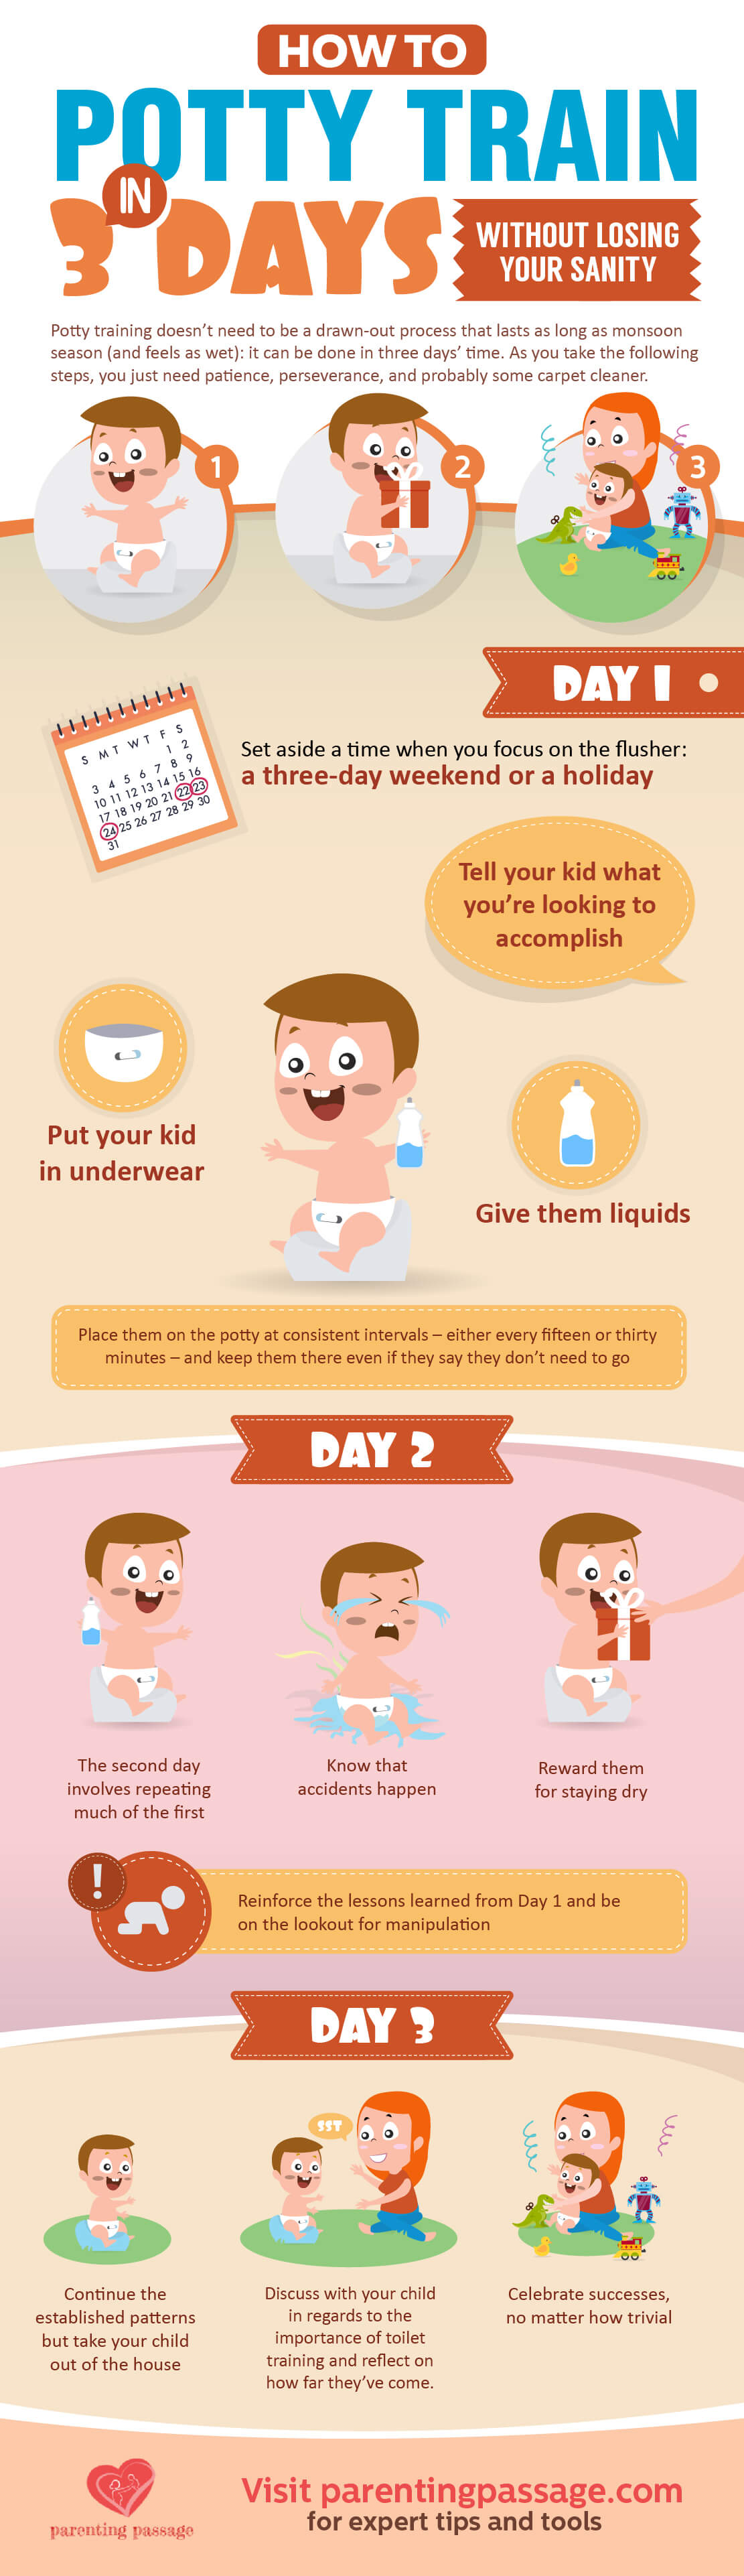 How to Potty Train in 3 Days Without Losing Your Sanity